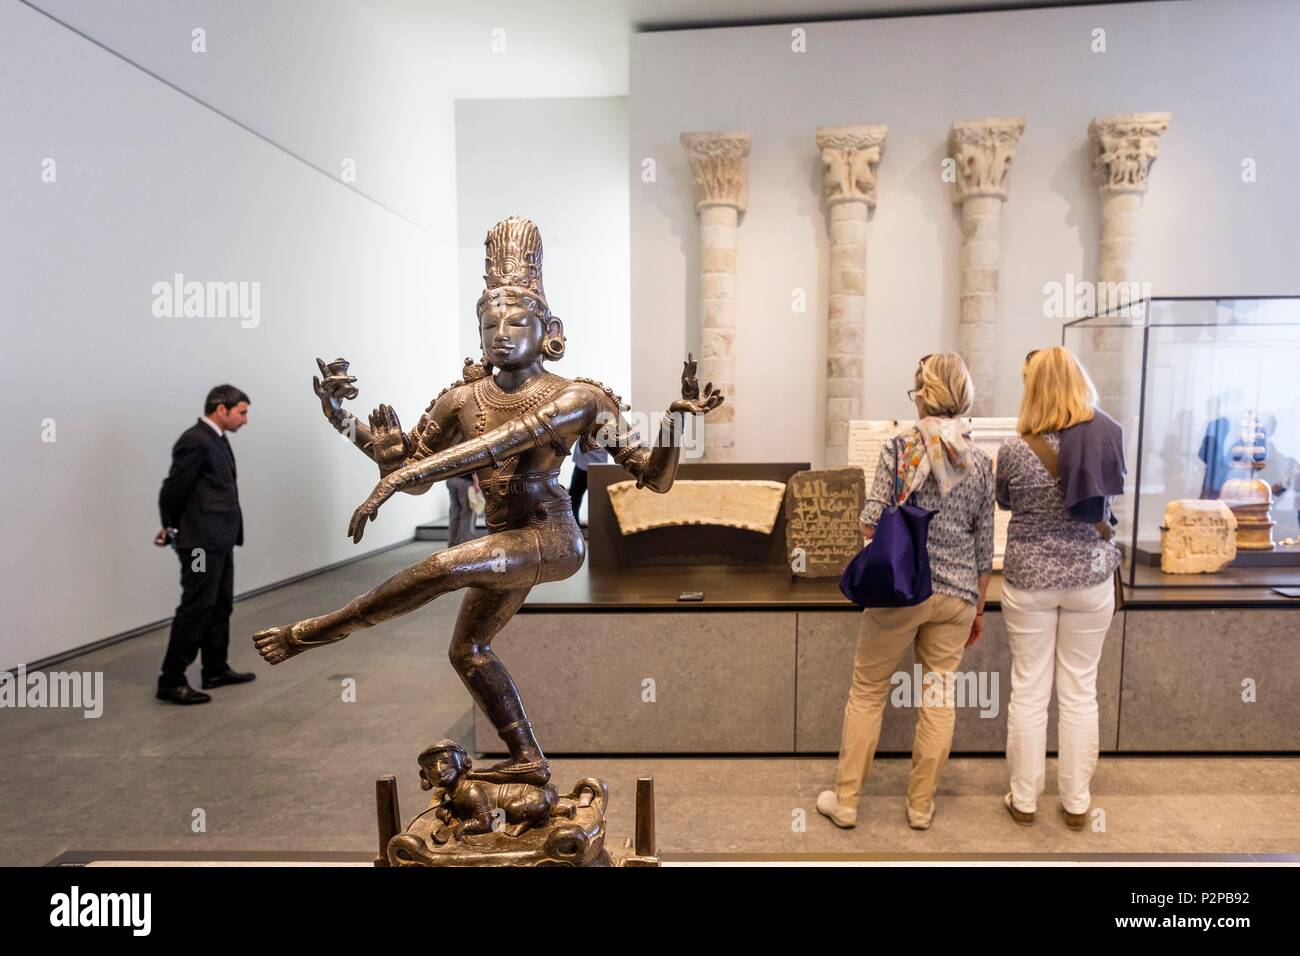 United Arab Emirates, Abu Dhabi, Saadiyat island, the Louvre Abu Dhabi is the first universal museum in the Arab world designed and built by French architect Jean Nouvel, dancing Shiva (South India, 10th century) Stock Photo